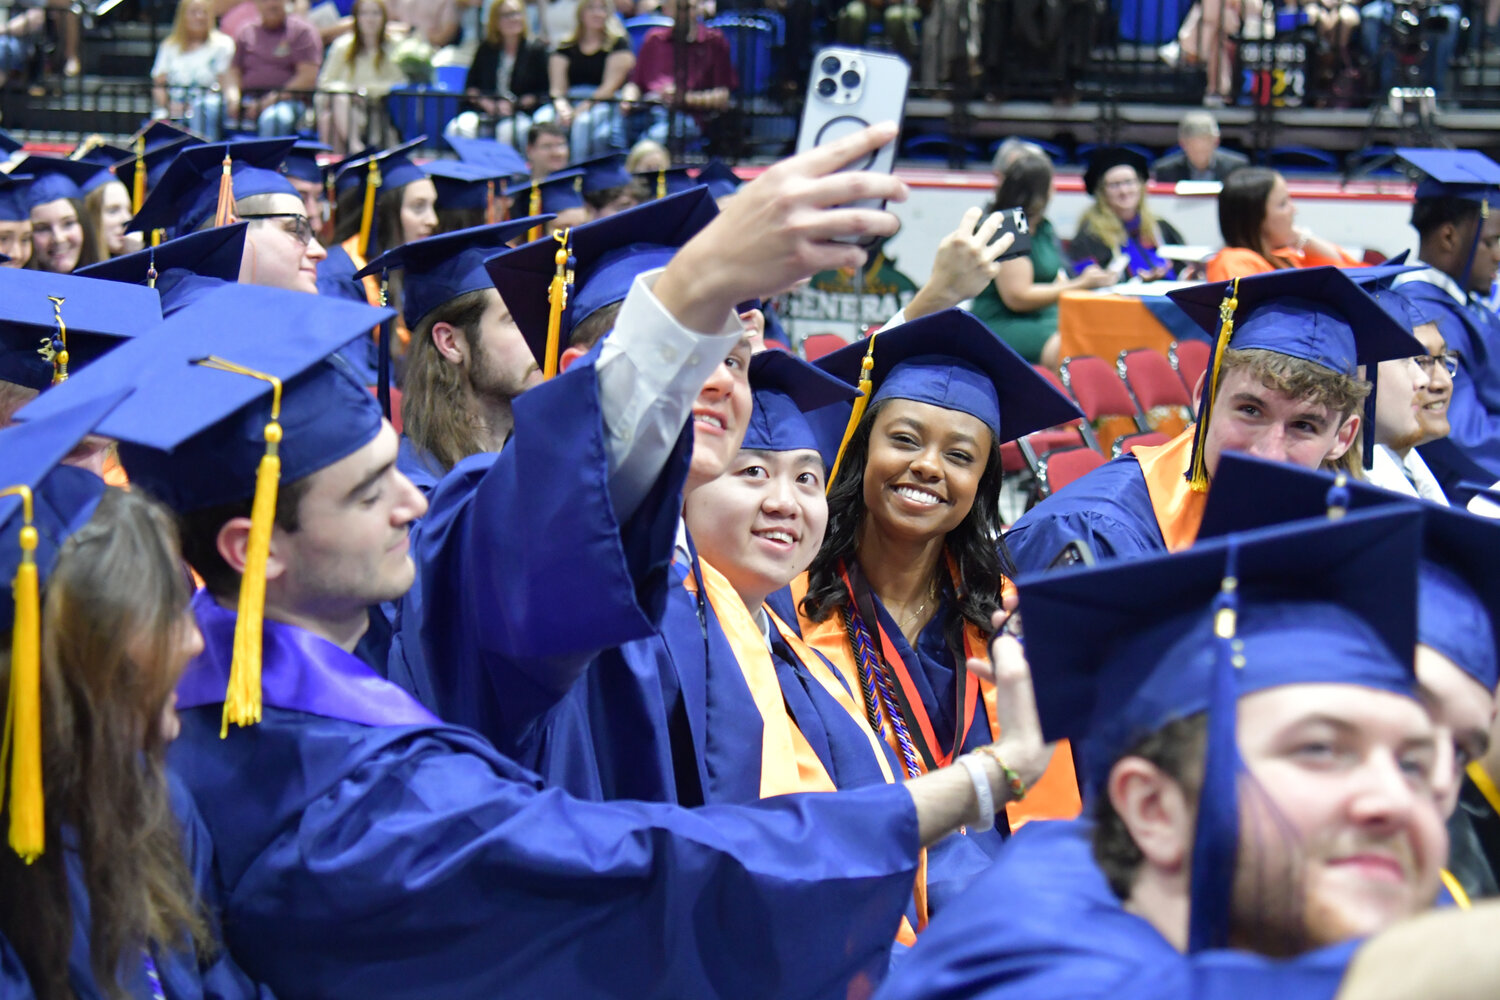 Utica University take selfies and celebrate their 74th undergraduate commencement ceremony on Thursday, May 11, where the university honored 425  graduates at the Adirondack Bank Center at the Utica Memorial Auditorium.